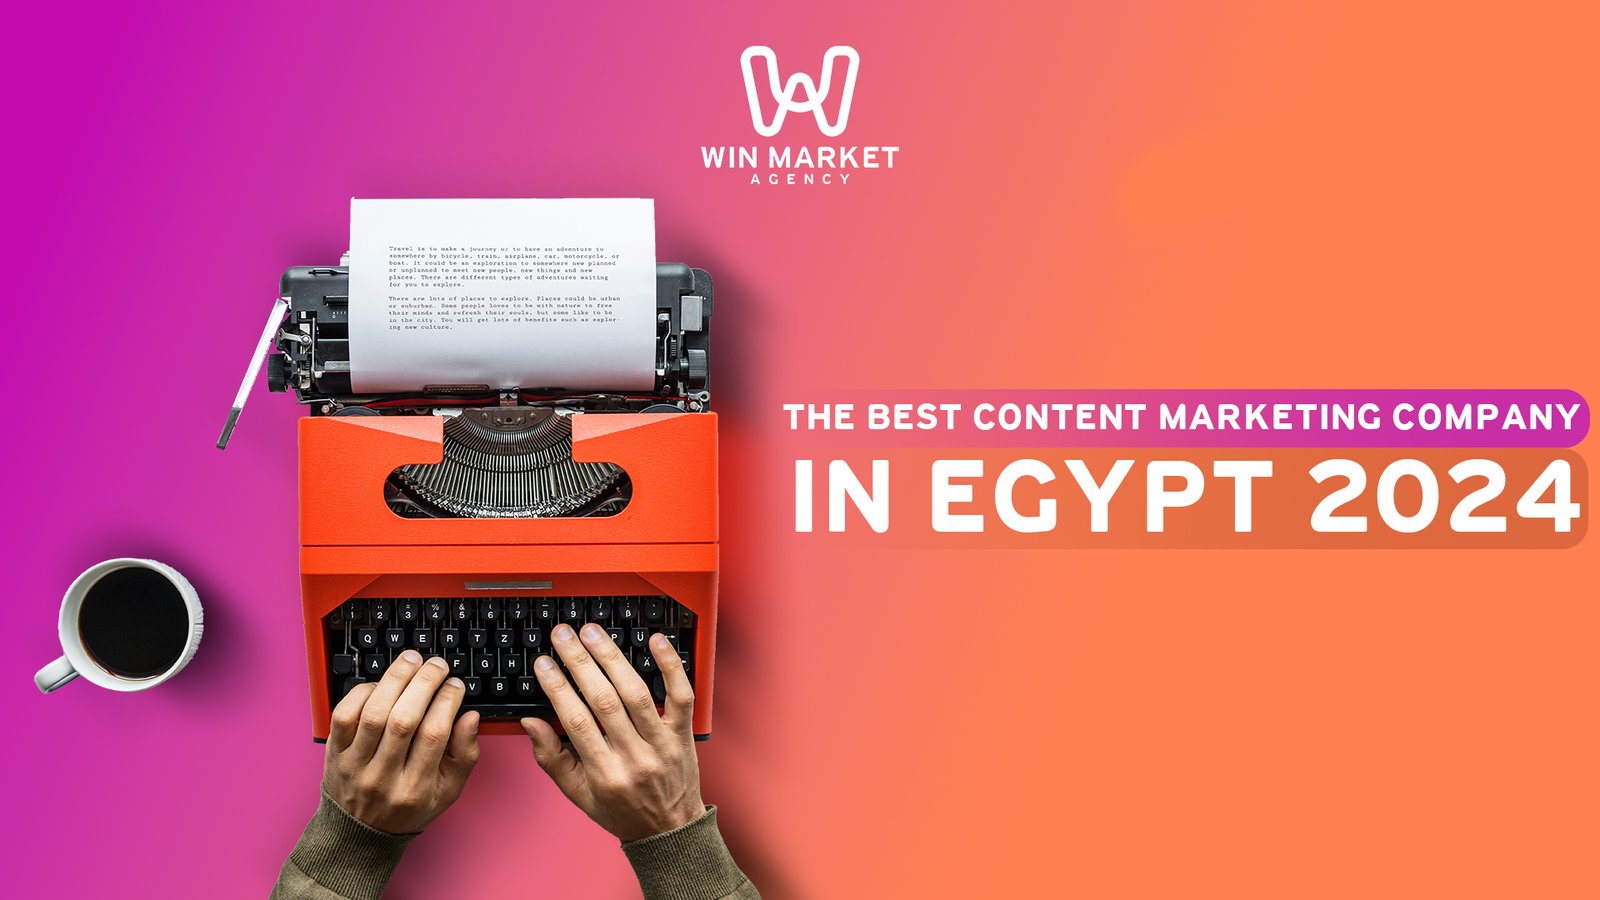 The best content marketing company in Egypt 2024